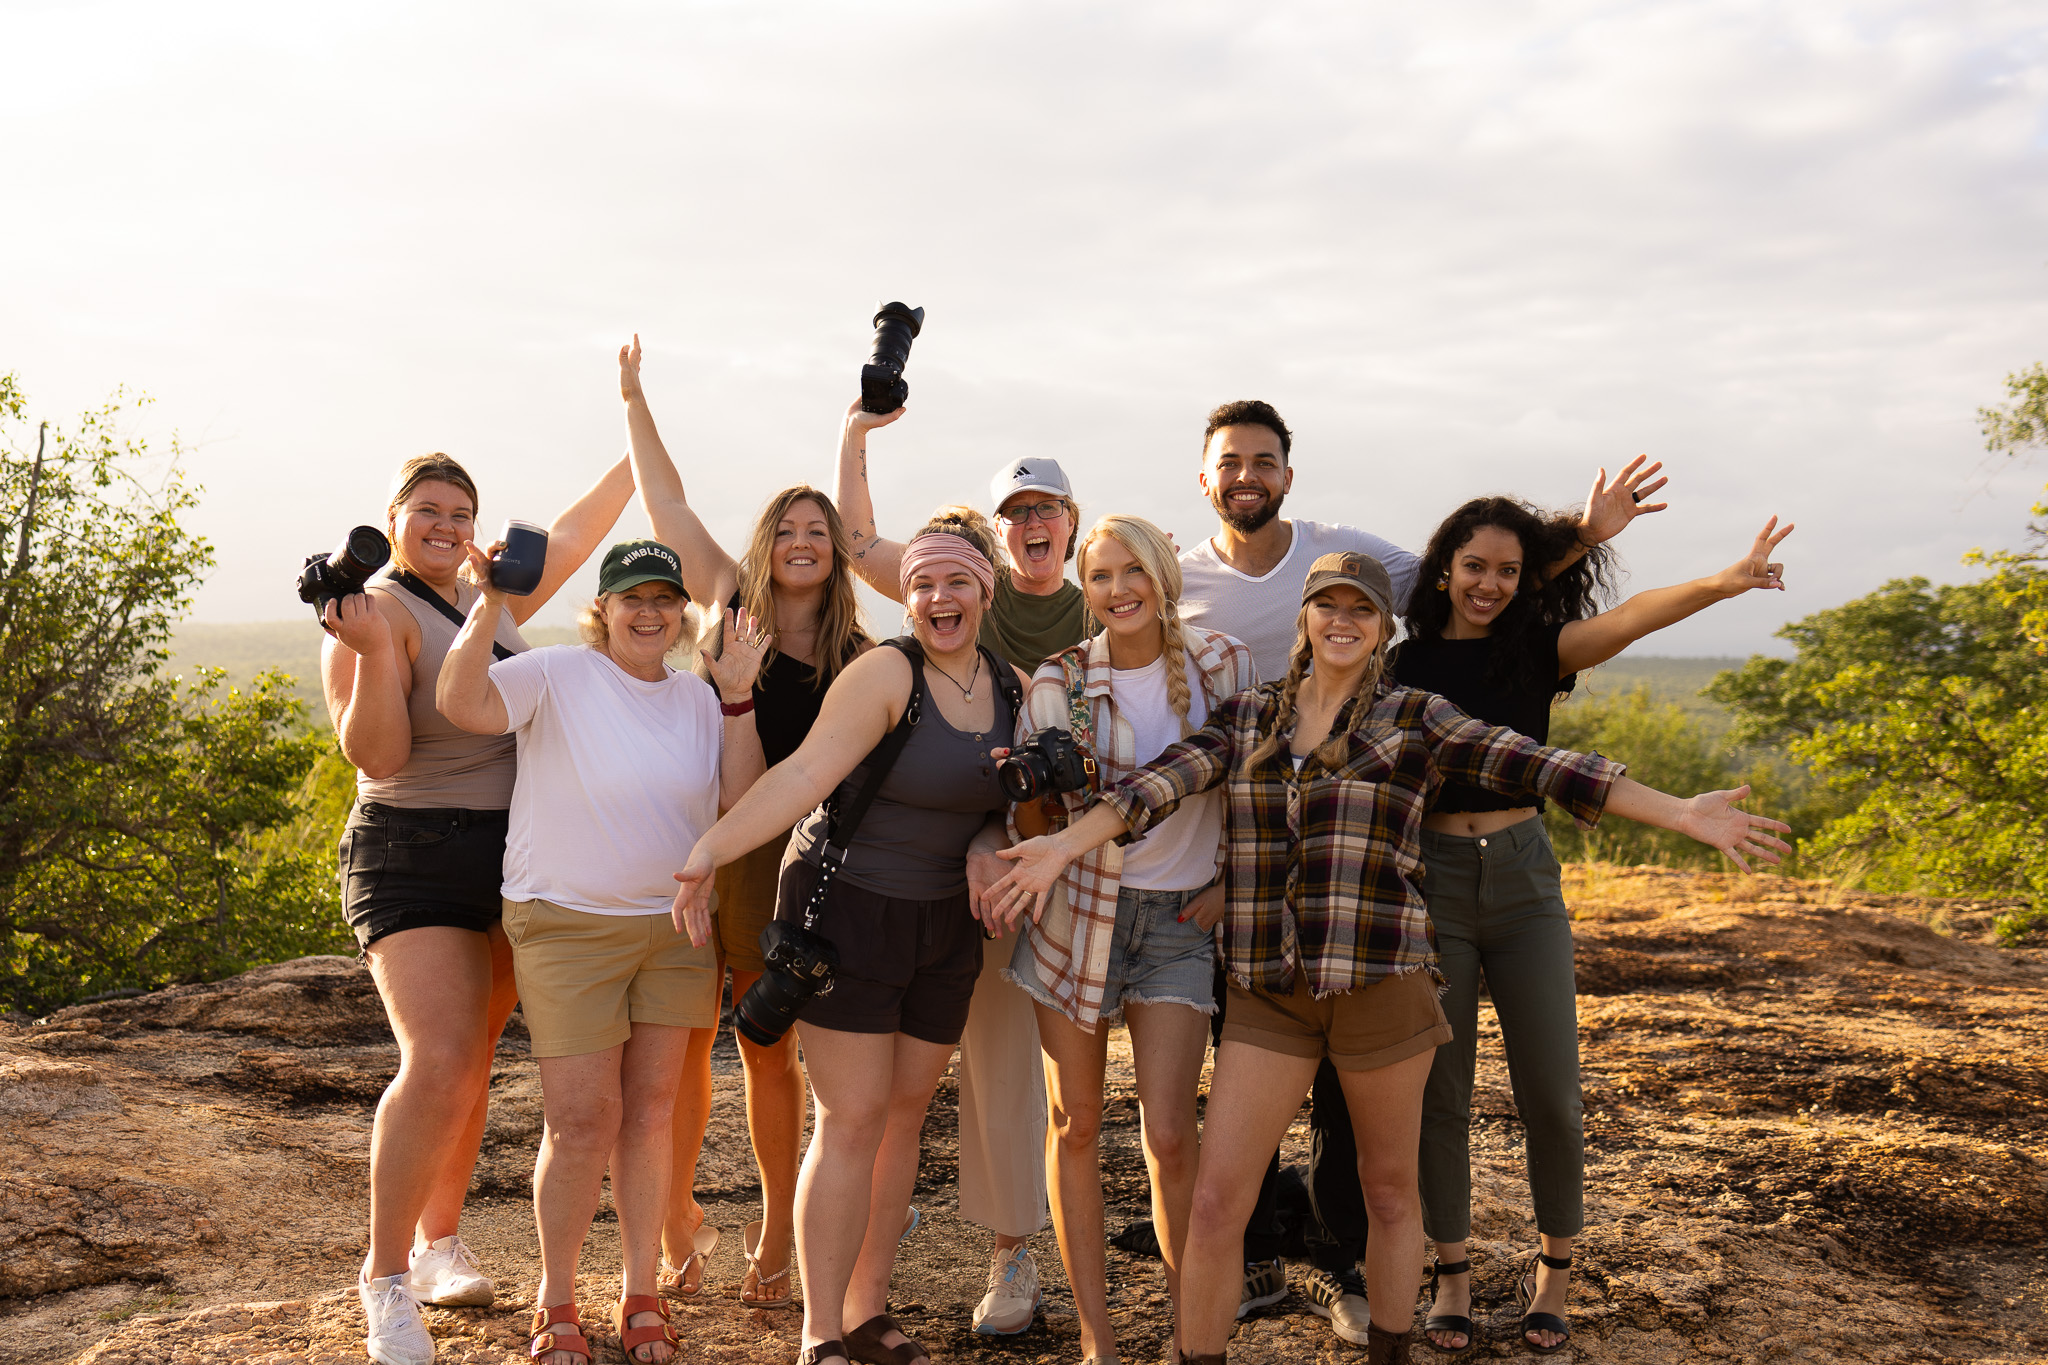 A group of destination wedding photographers during a photography content retreat in South Africa, standing together in a group smiling and cheering, lifting their hands in the air